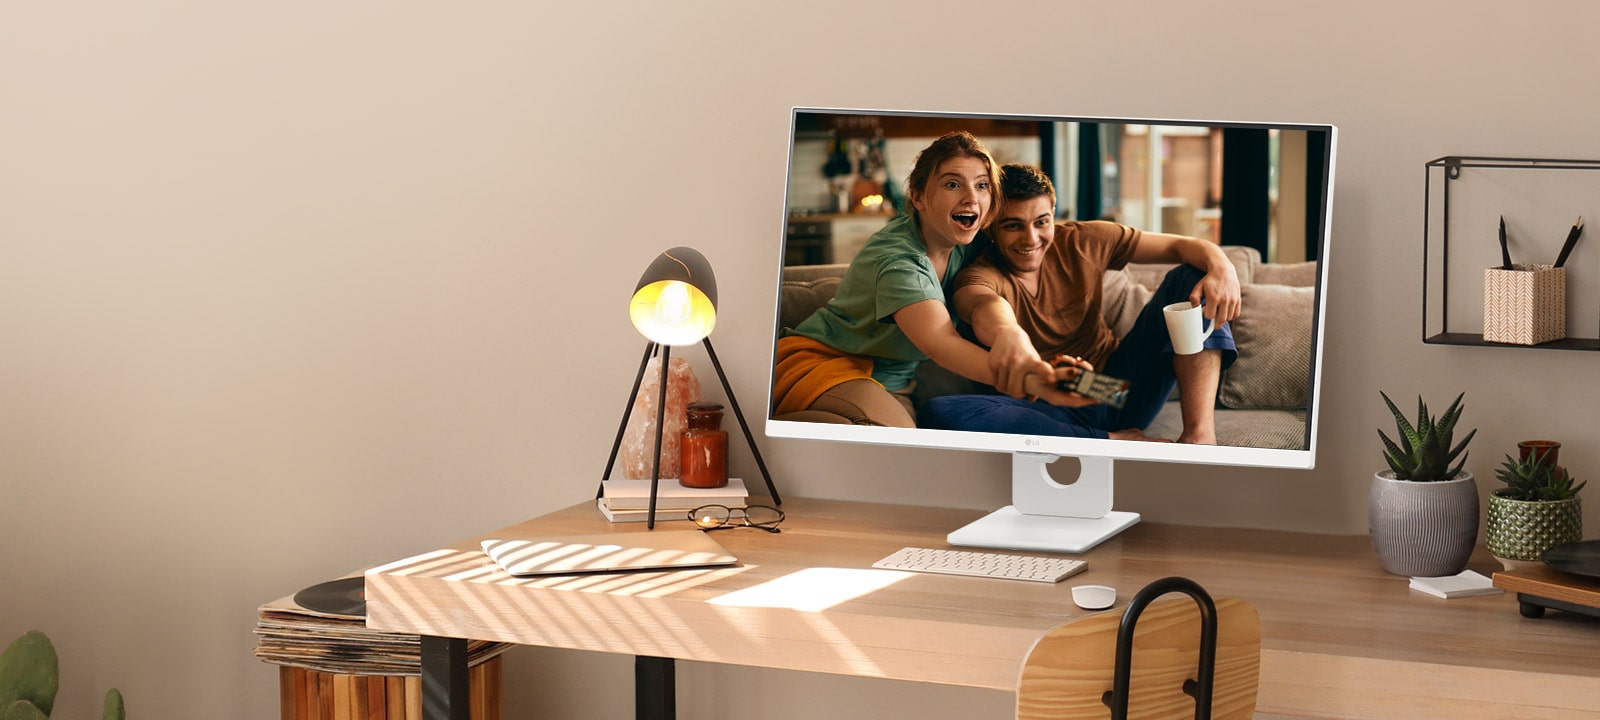 On the desk by the sunlit window, there is a smart monitor displaying a movie on its screen. Beside the monitor, there is a lamp and a potted plant. On the desk, there is a keyboard and a mouse.